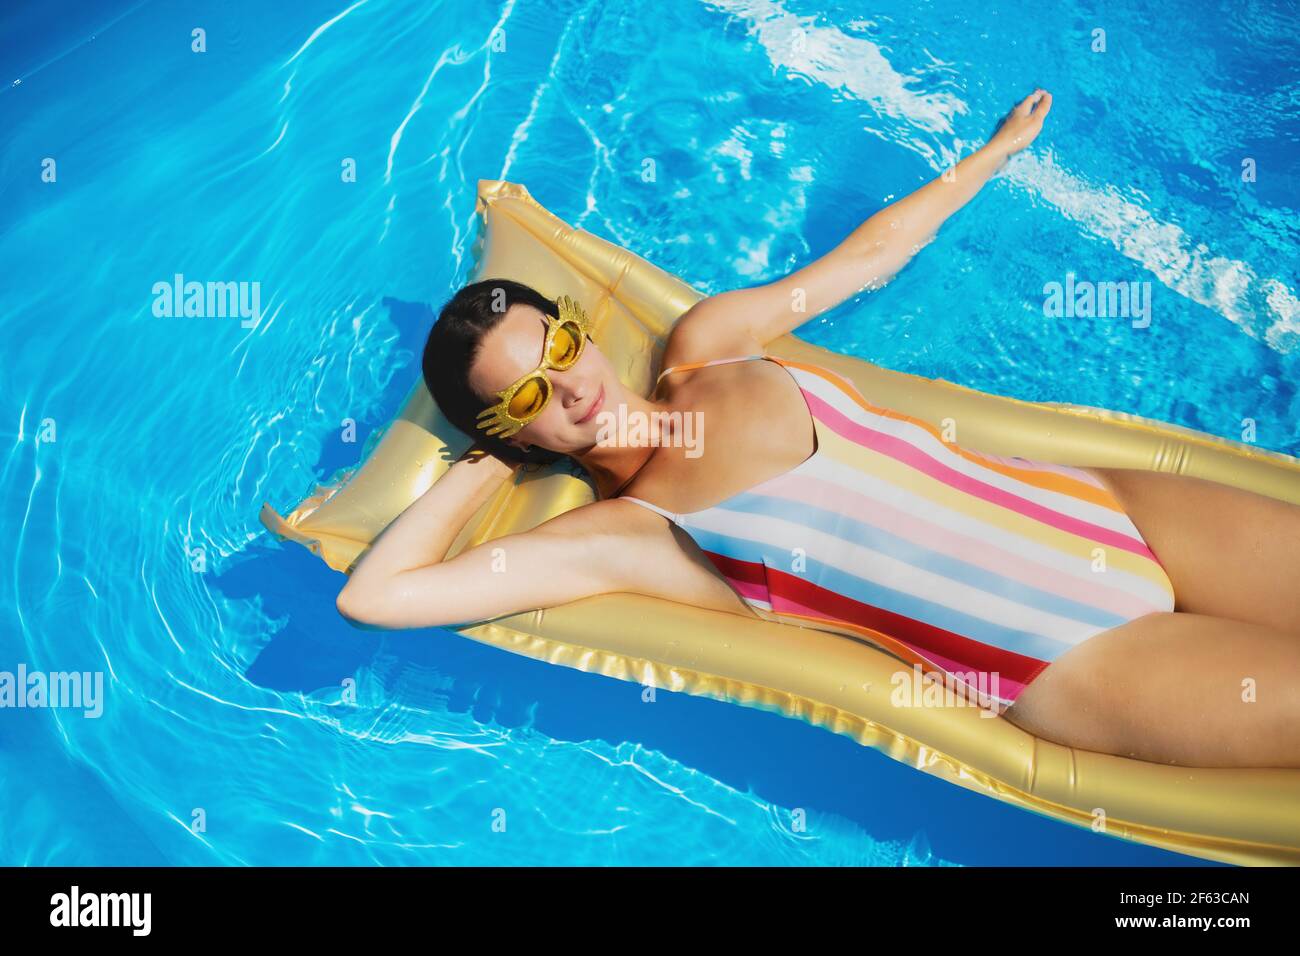 Top view of young woman in swimming pool outdoors on floating bed, relaxing. Stock Photo